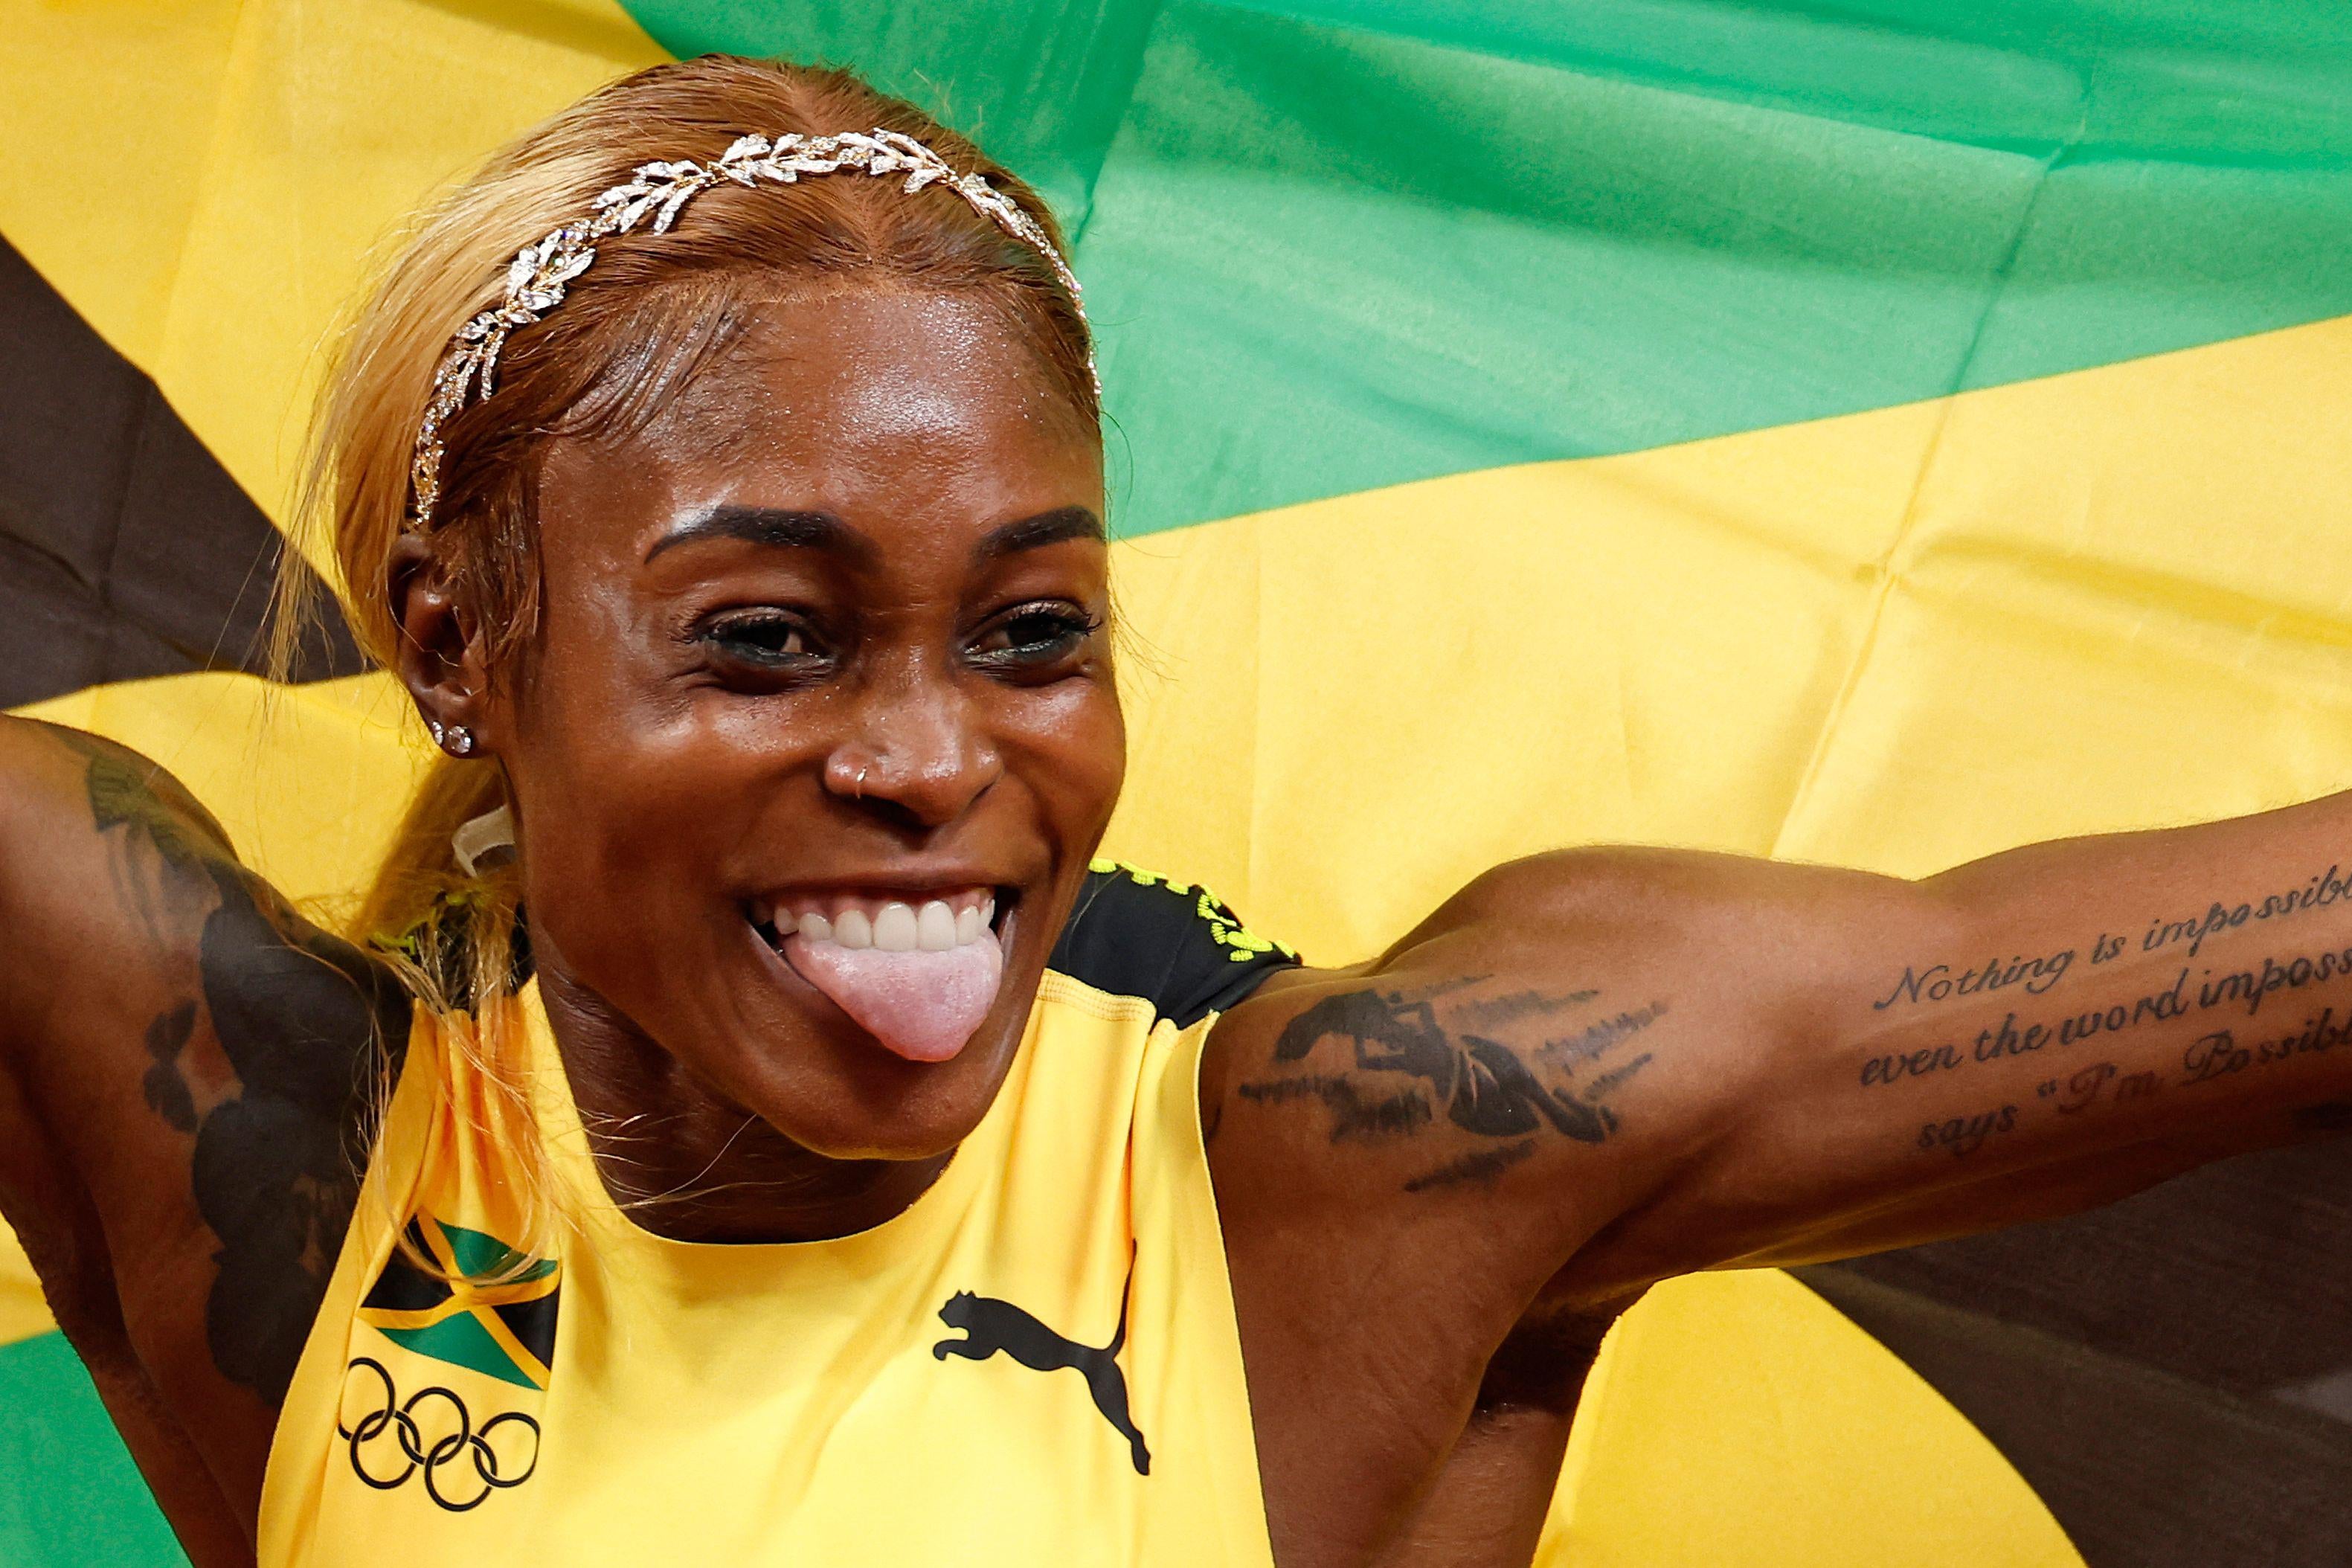 Thompson-Herah sticks her tongue out and smiles, holding a large Jamaican flag behind her, in her jersey and revealing tattoos on both arms